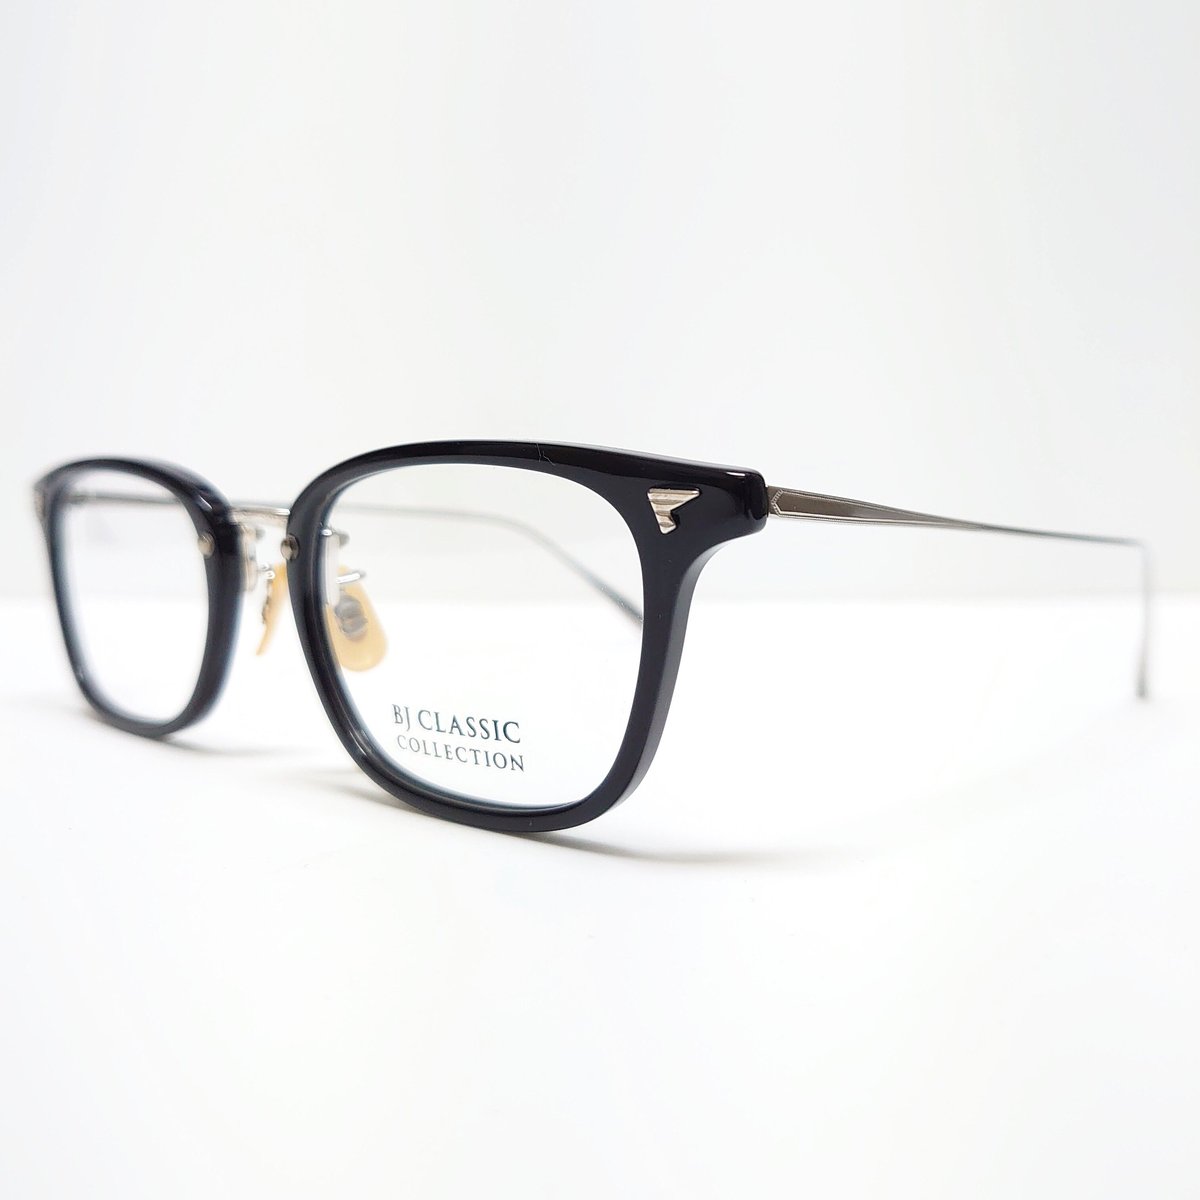 BJ CLASSIC COLLECTION COM-545NT C-1-2 | OPTICAL